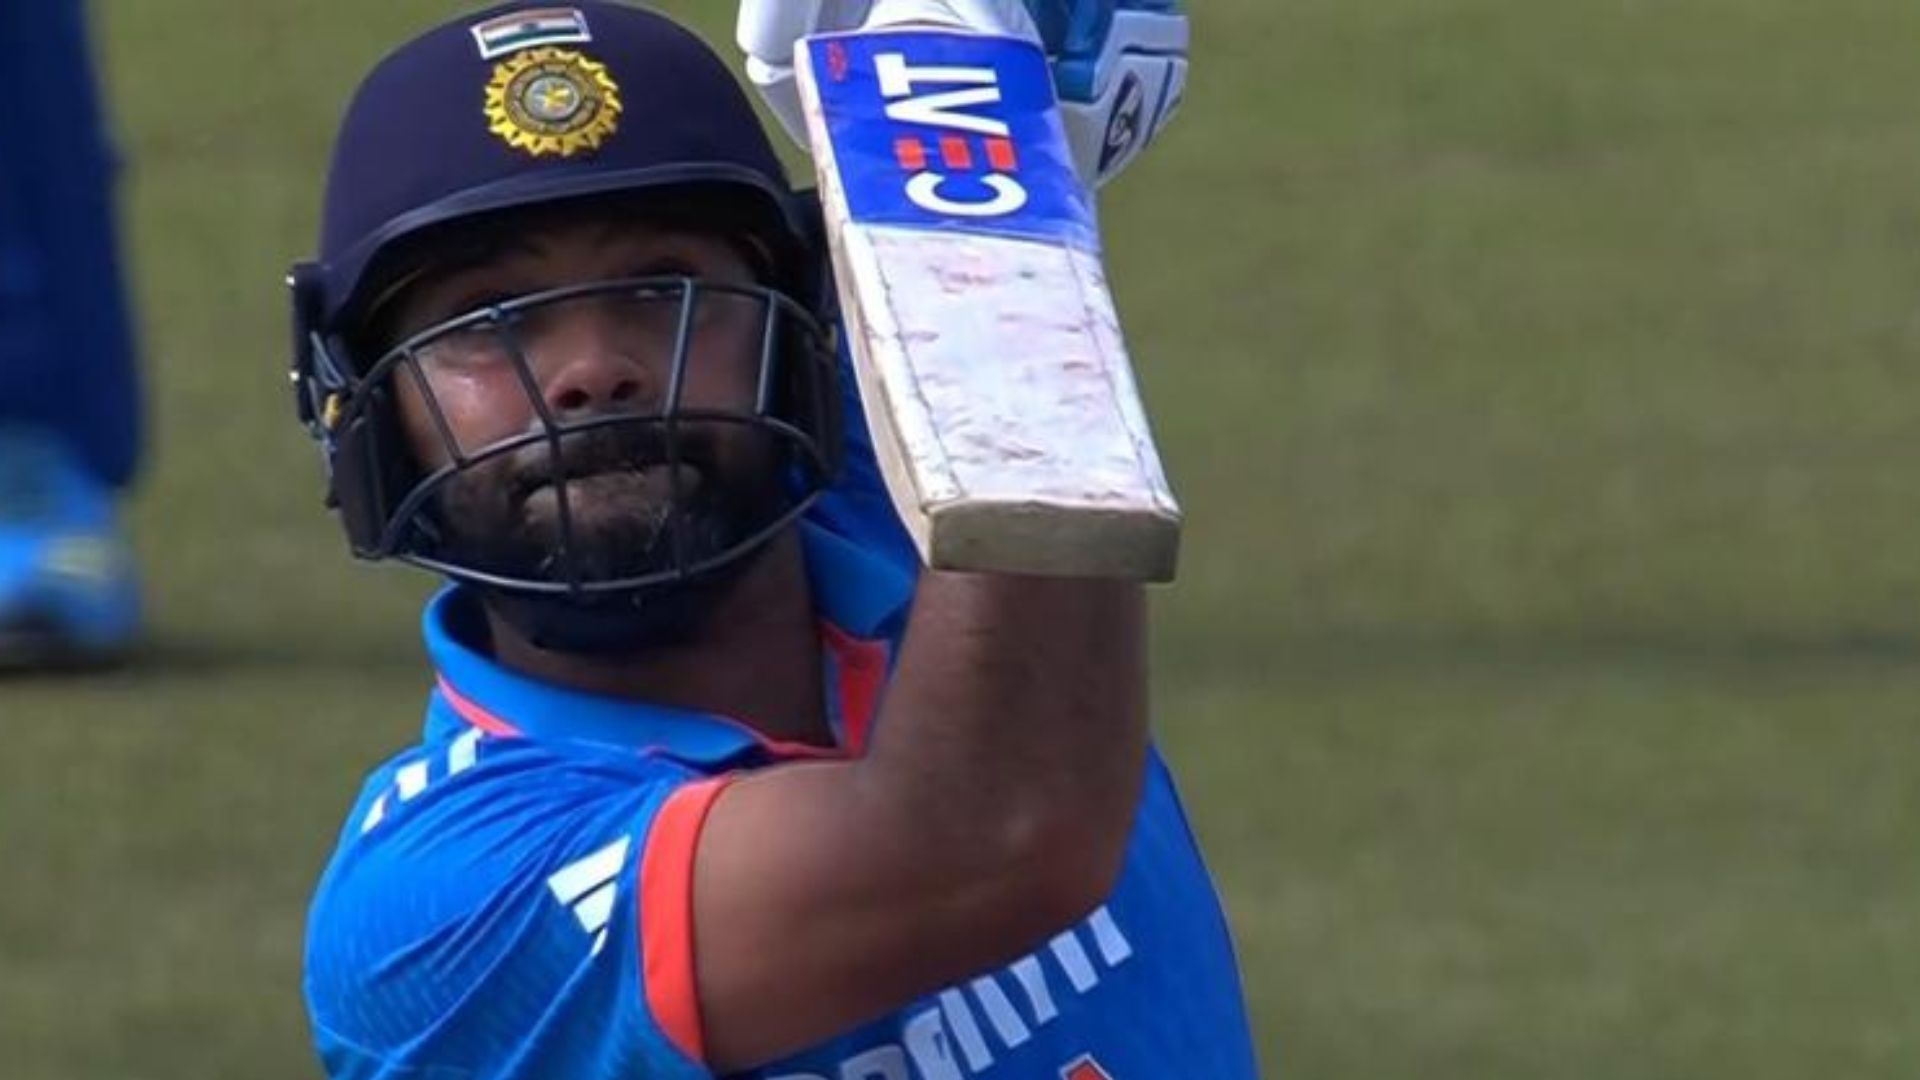 Rohit Sharma held the pose after the six that got him past 10,000 ODI runs (P.C.:Hotstar)